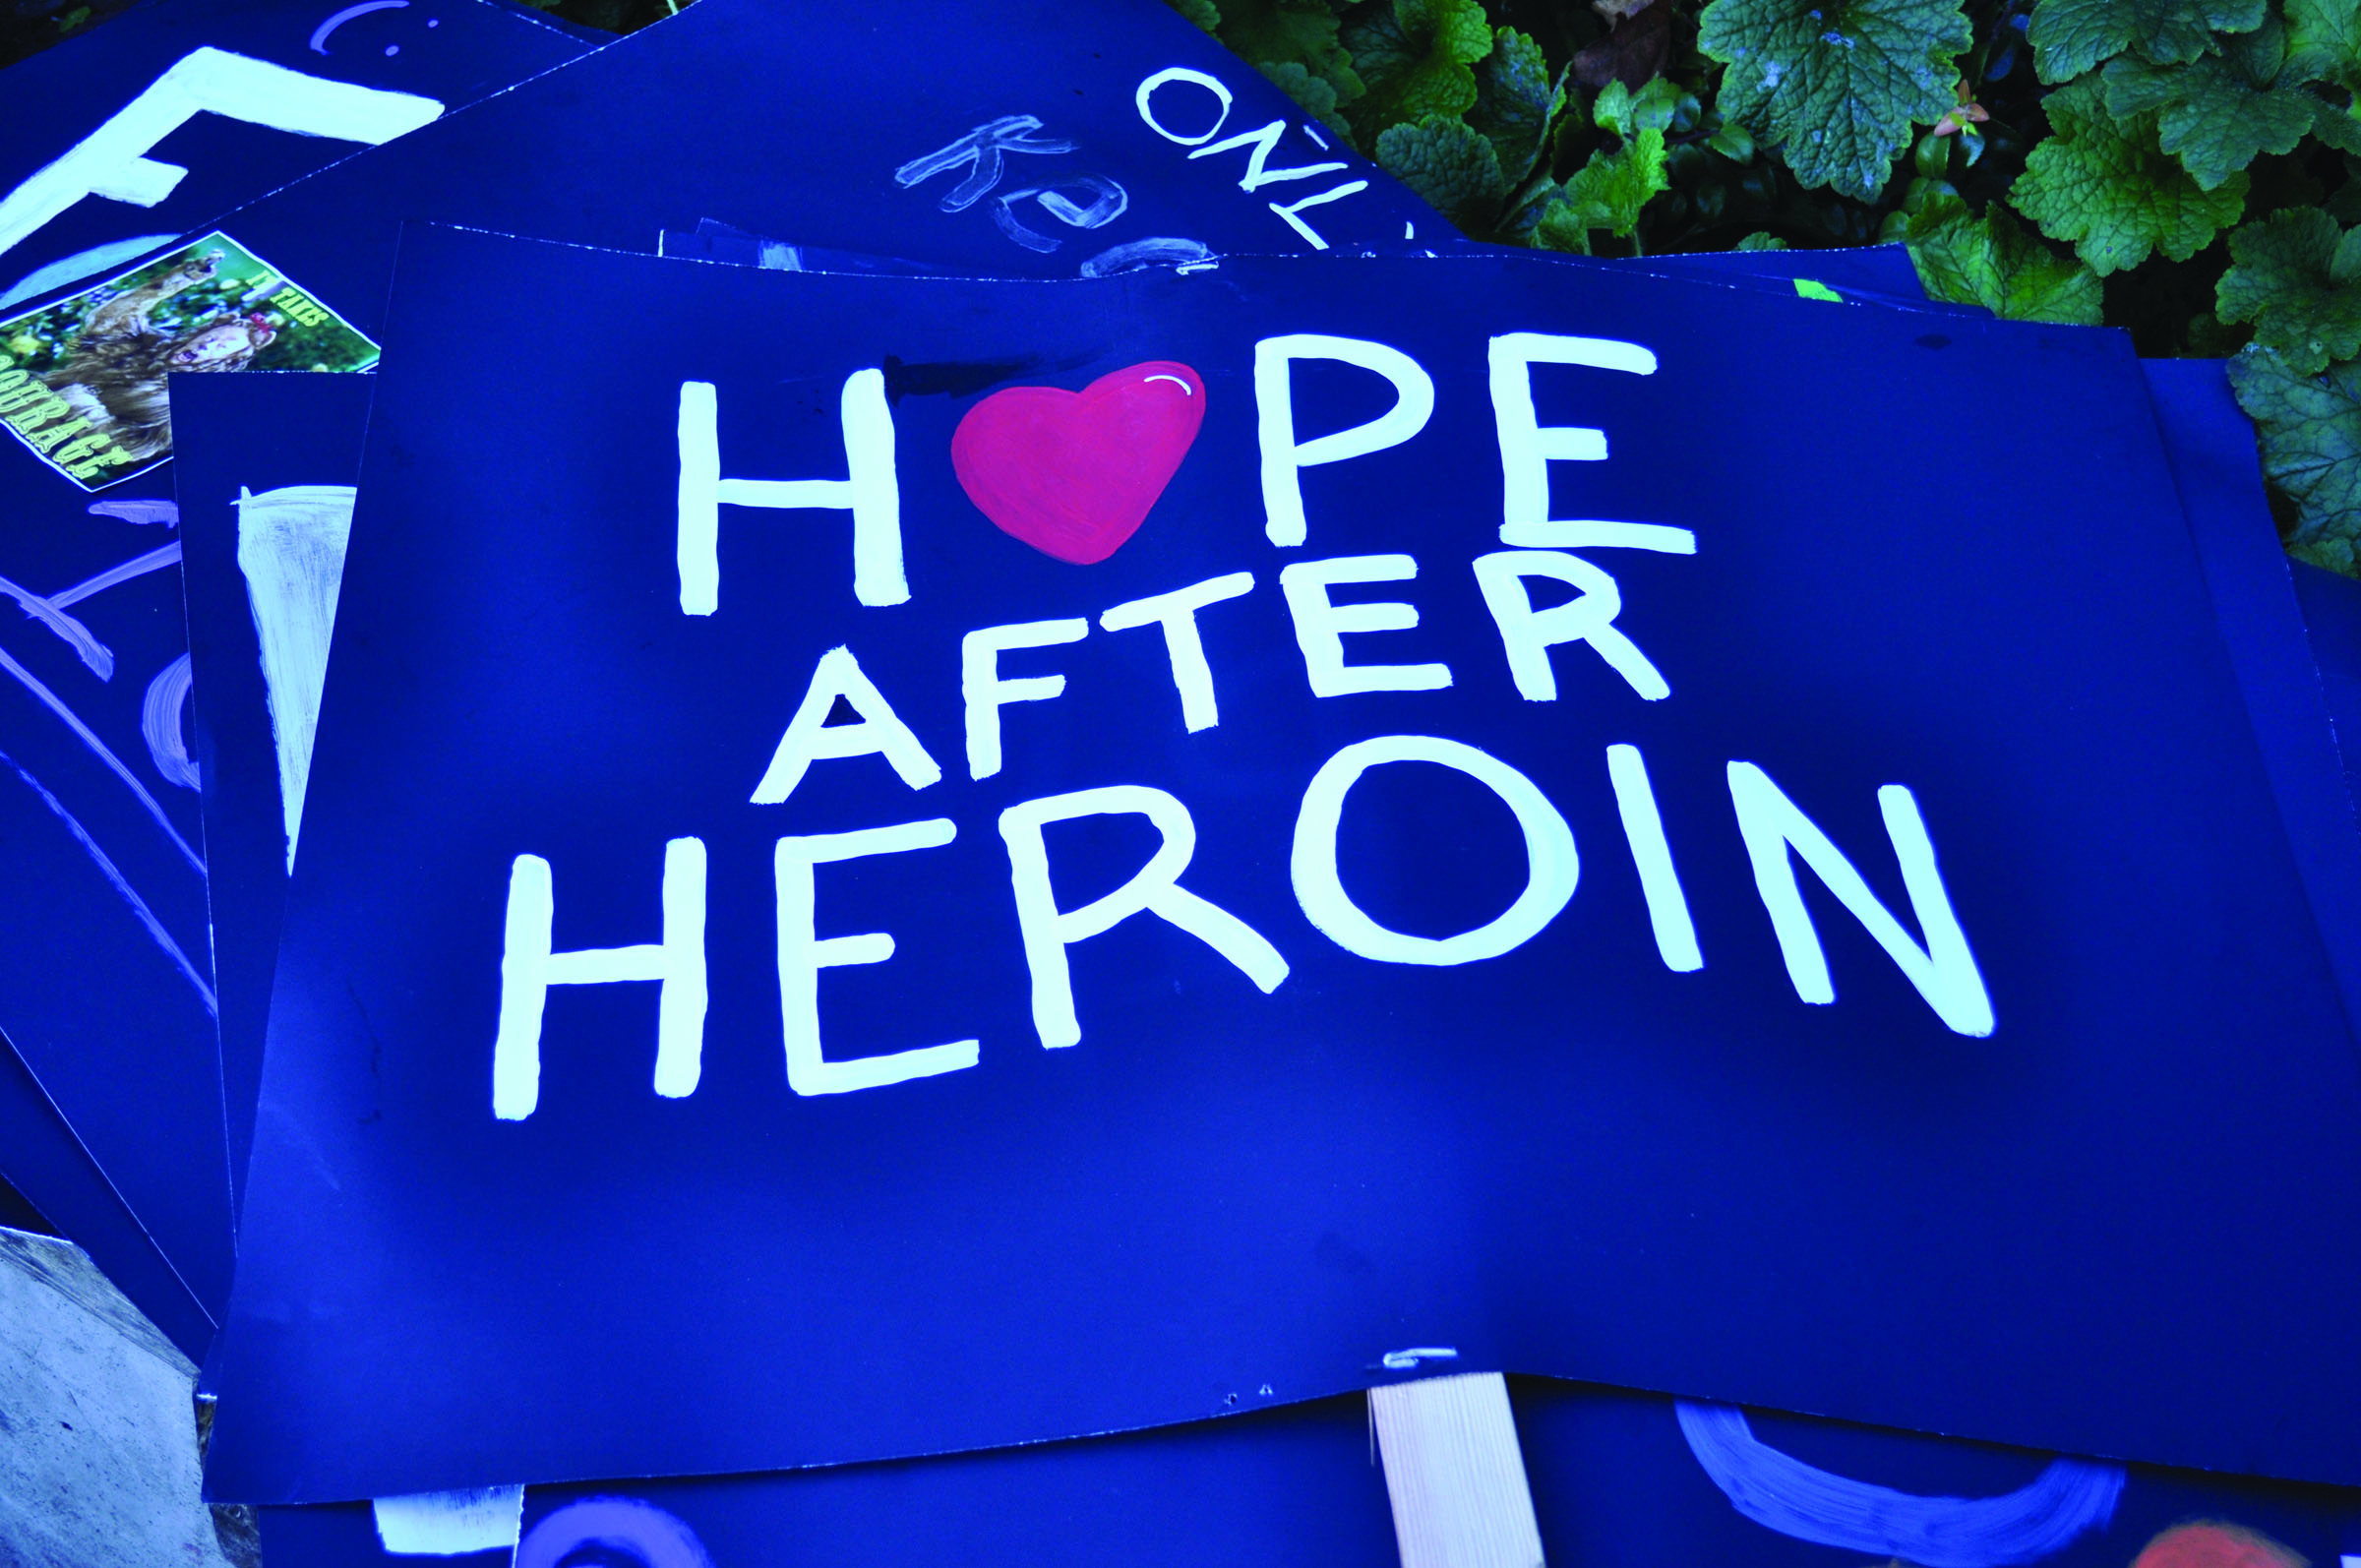 Members of the Hope after Heroin group in Port Angeles picked up syringes Friday at the Conrad Dyer Memorial Fountain